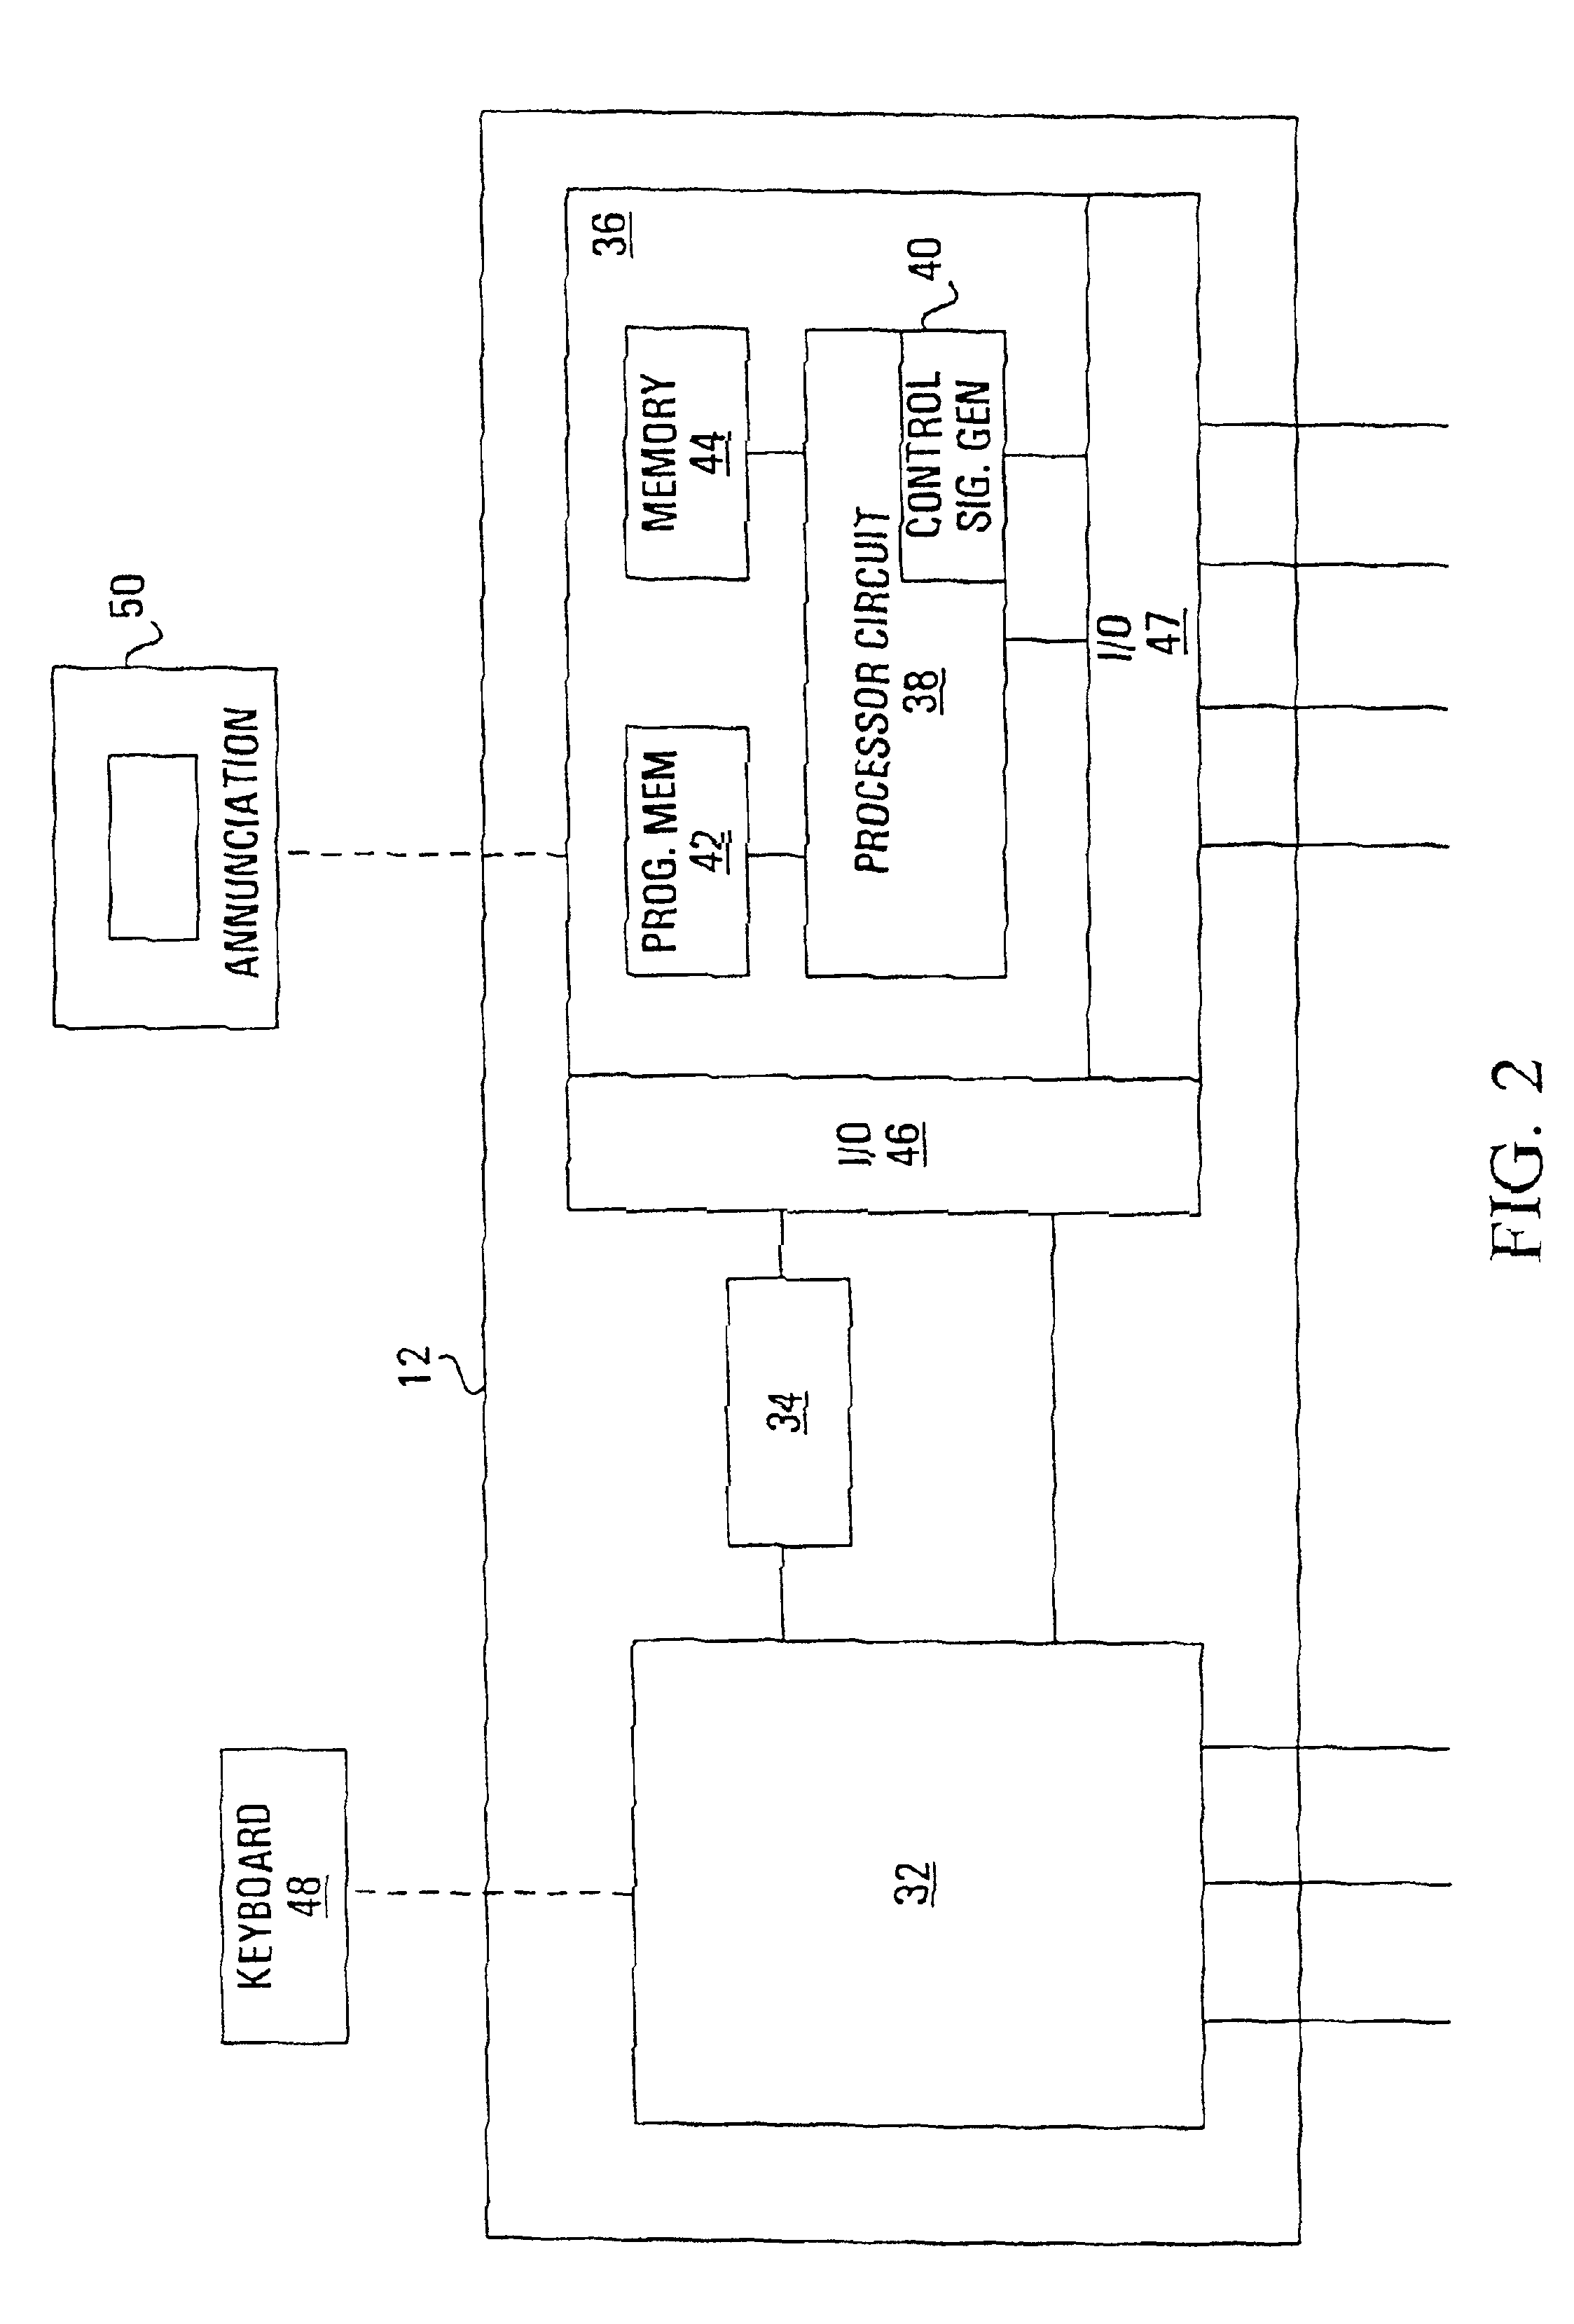 Methods, apparatus, media, and signals for managing utility usage